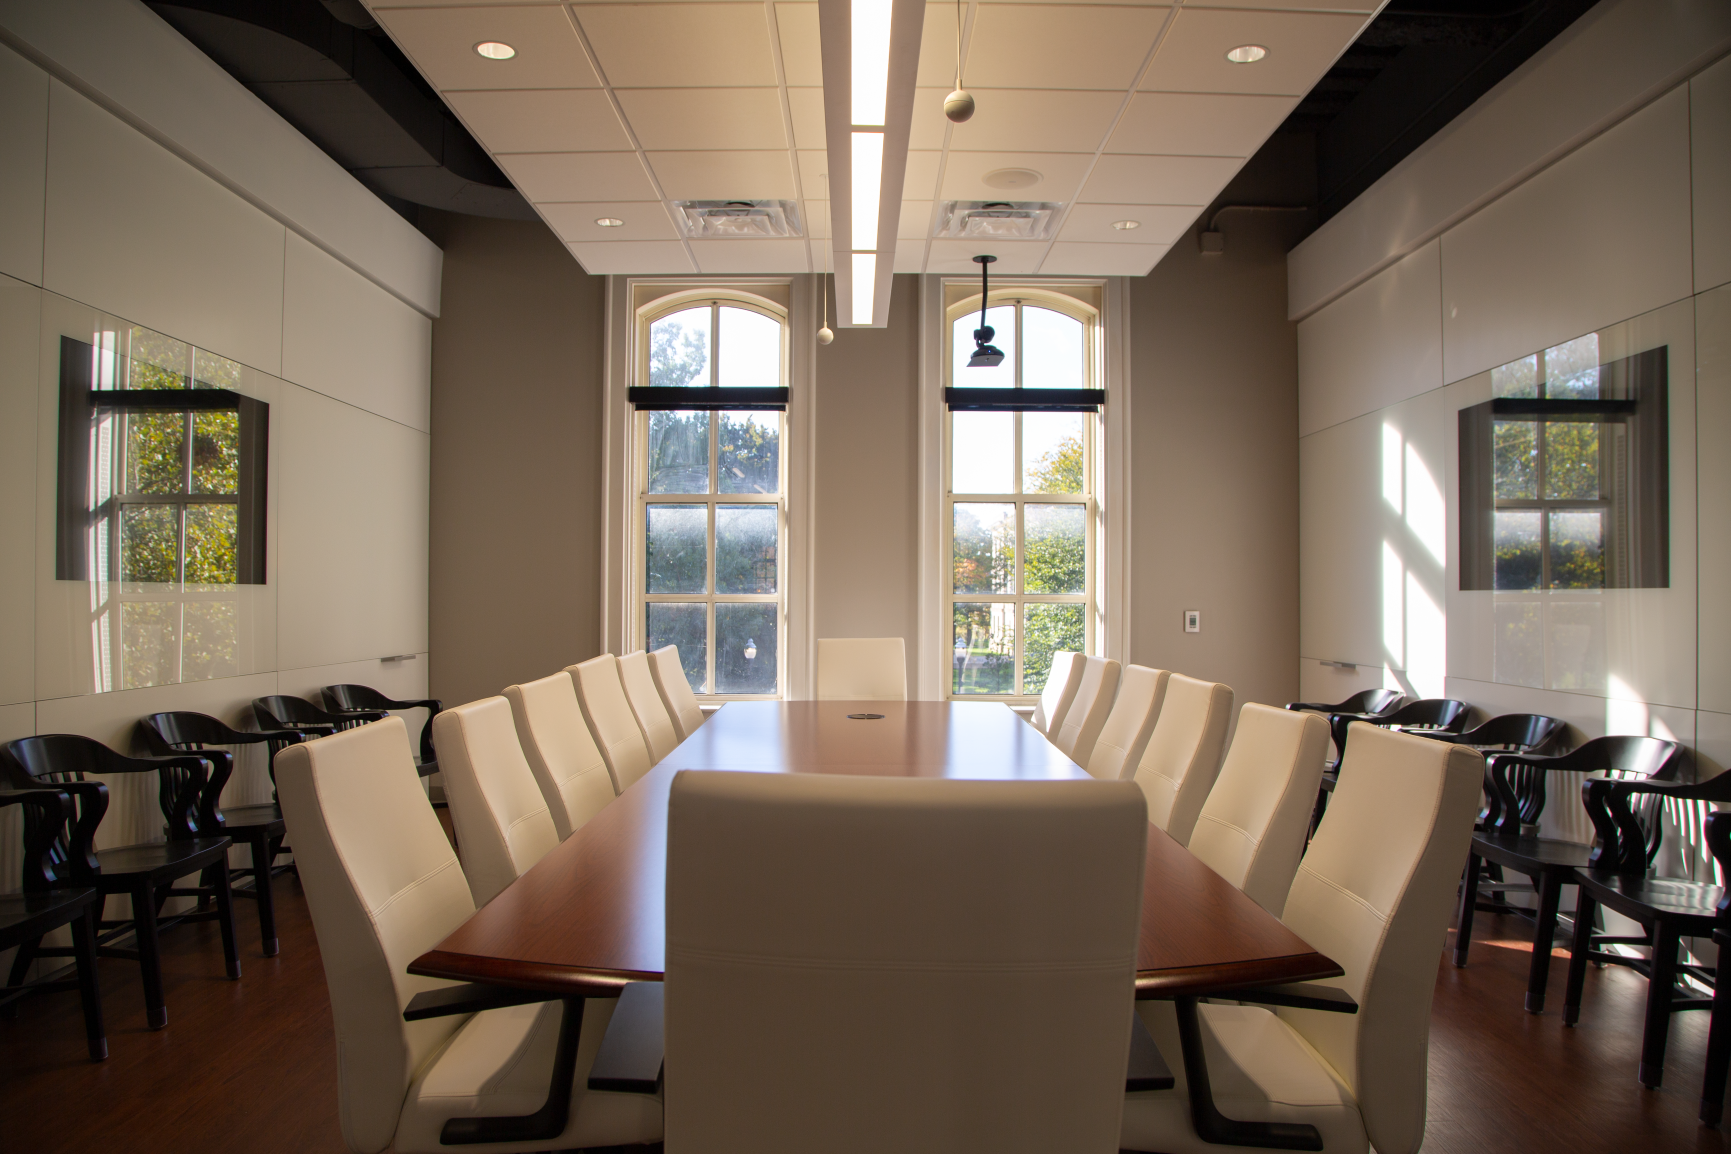 Modern, ergonomic chairs meet timeless, traditional style in this large conference room.